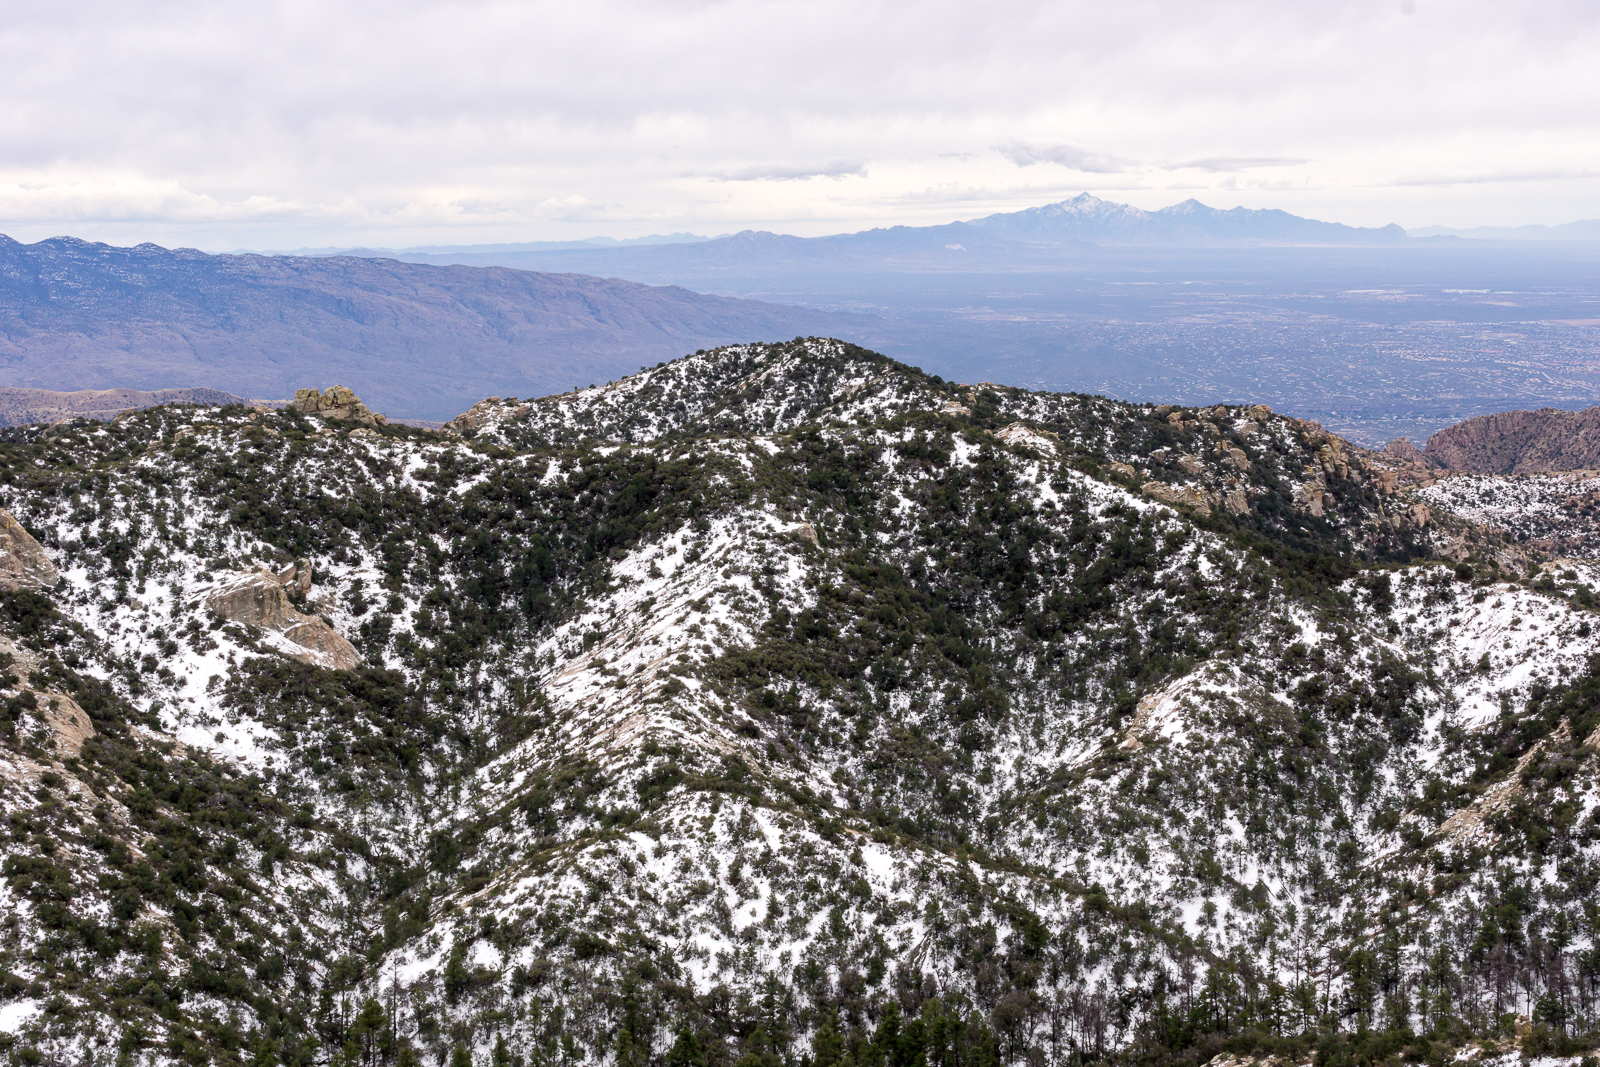 A snowy hillside - taken from the ridge south east of Bear Canyon. Tucson and Mount Wrightson in the background. December 2015.